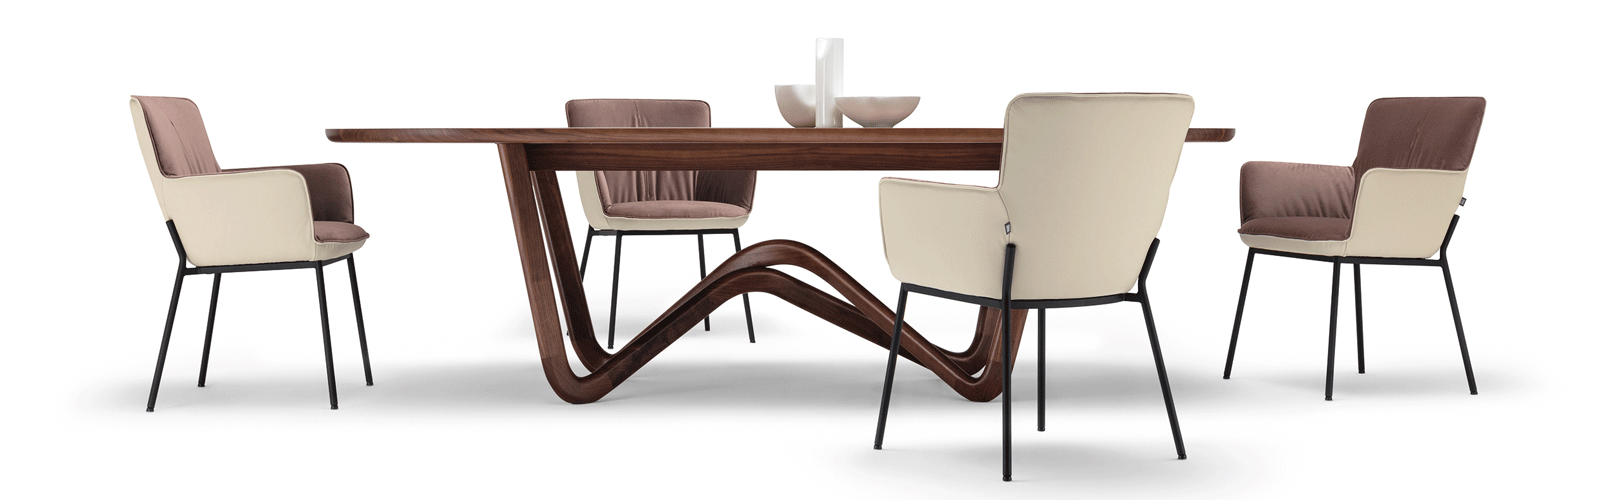 Rolf Benz 988 Dining Table